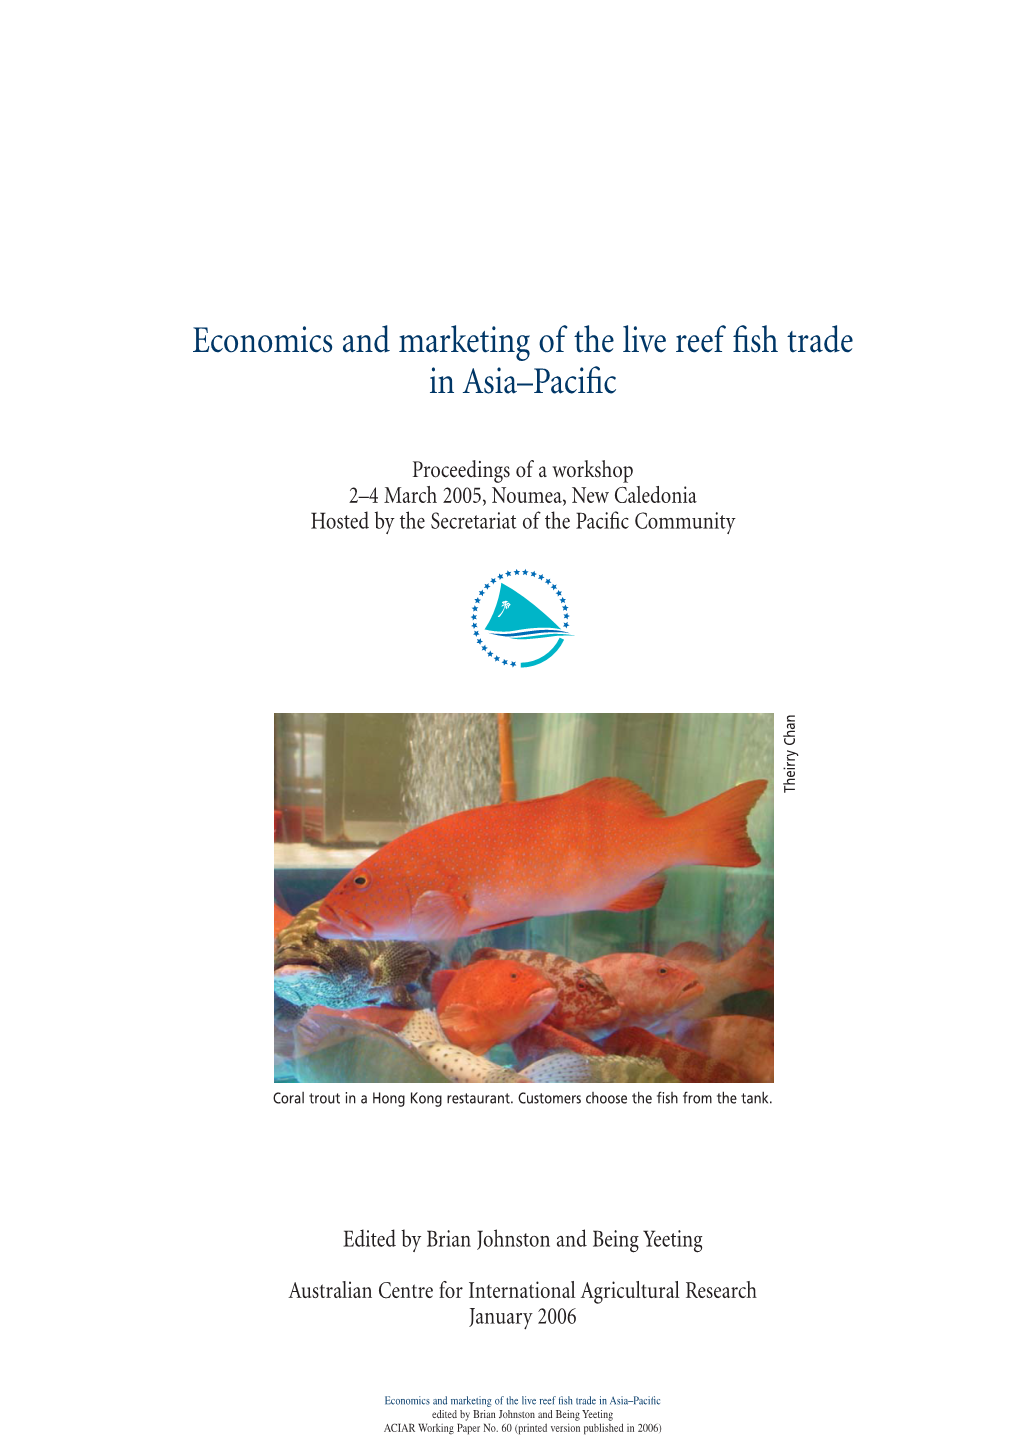 Economics and Marketing of the Live Reef Fish Trade in Asia–Pacific